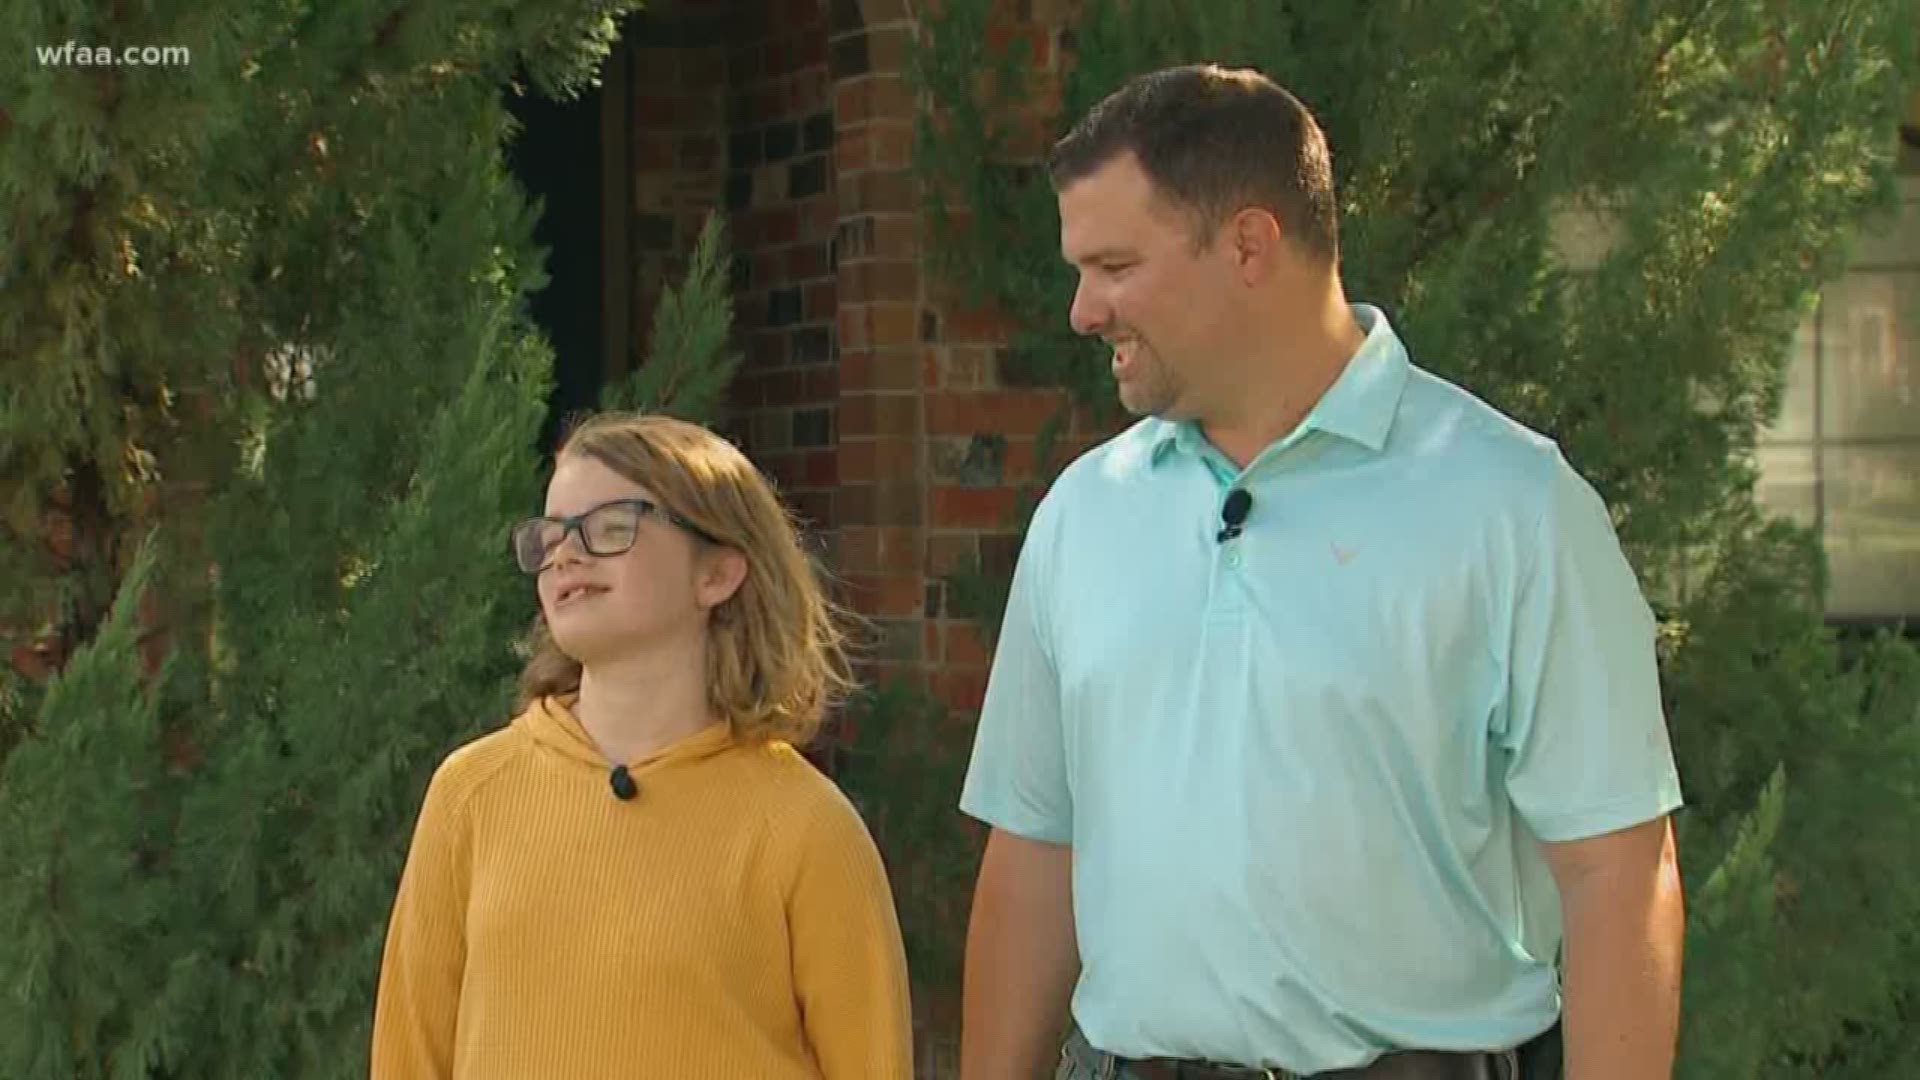 Josh Graham and his daughter Caitlyn instantly recognized the smell of natural gas in their neighborhood. They immediately called Atmos Energy.